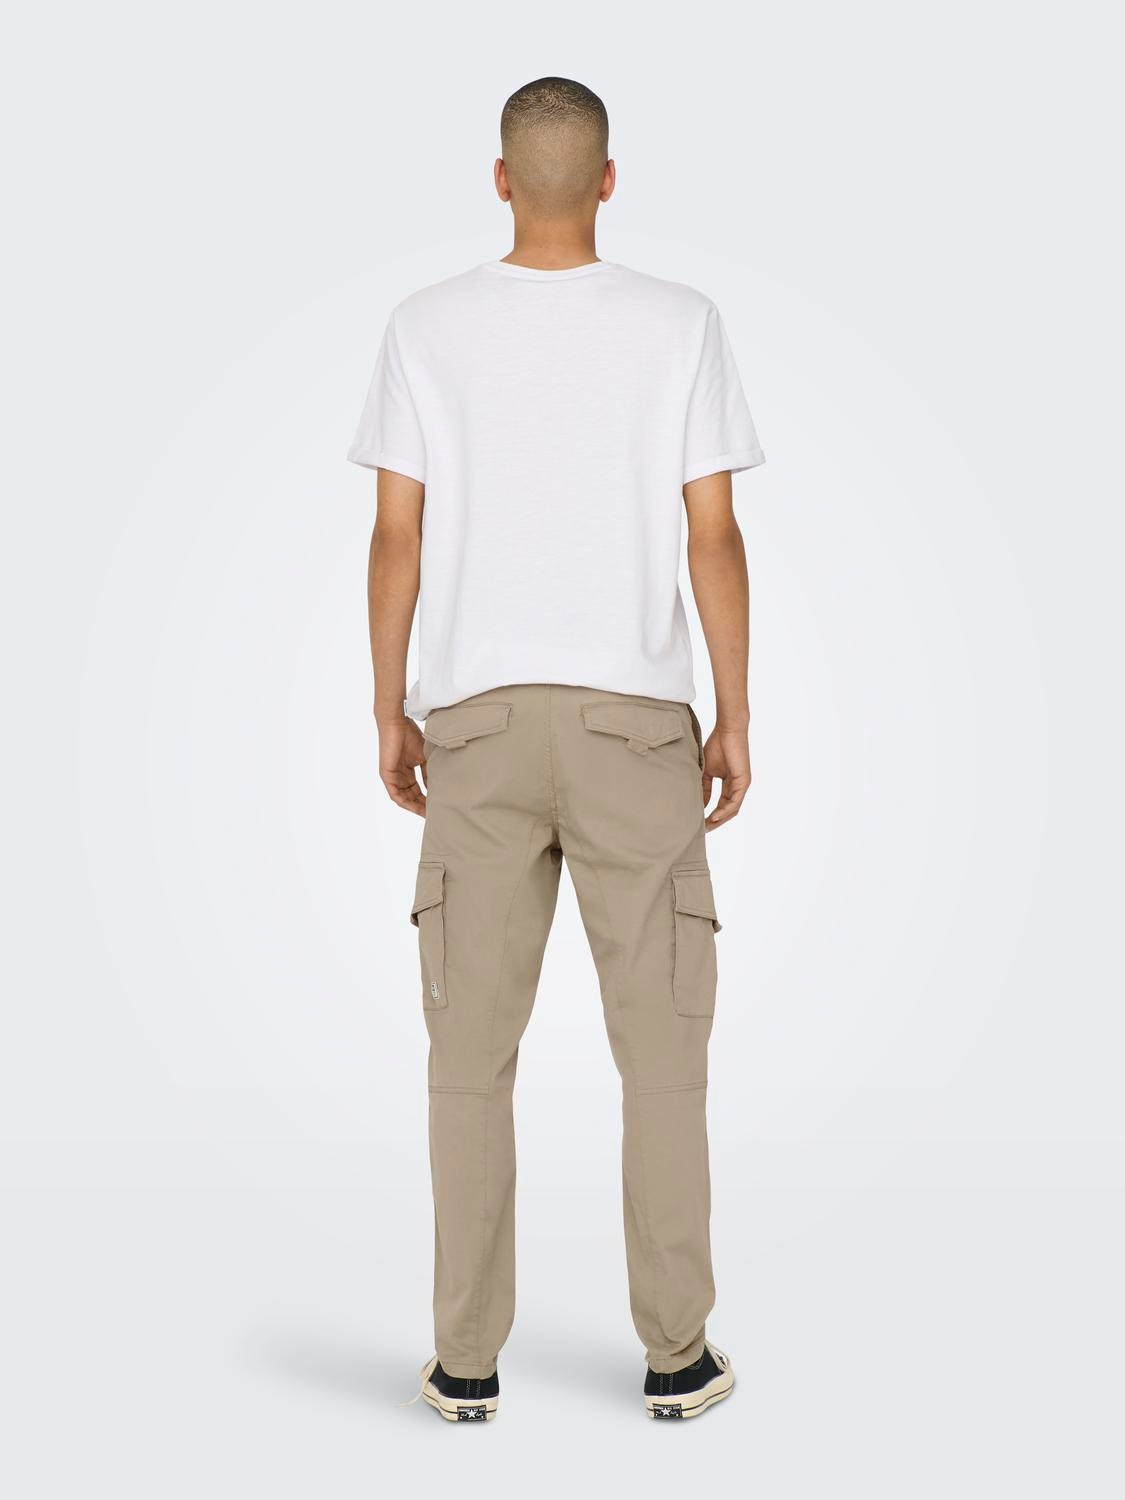 ONLY & SONS Chino pants -Crockery - 22025431